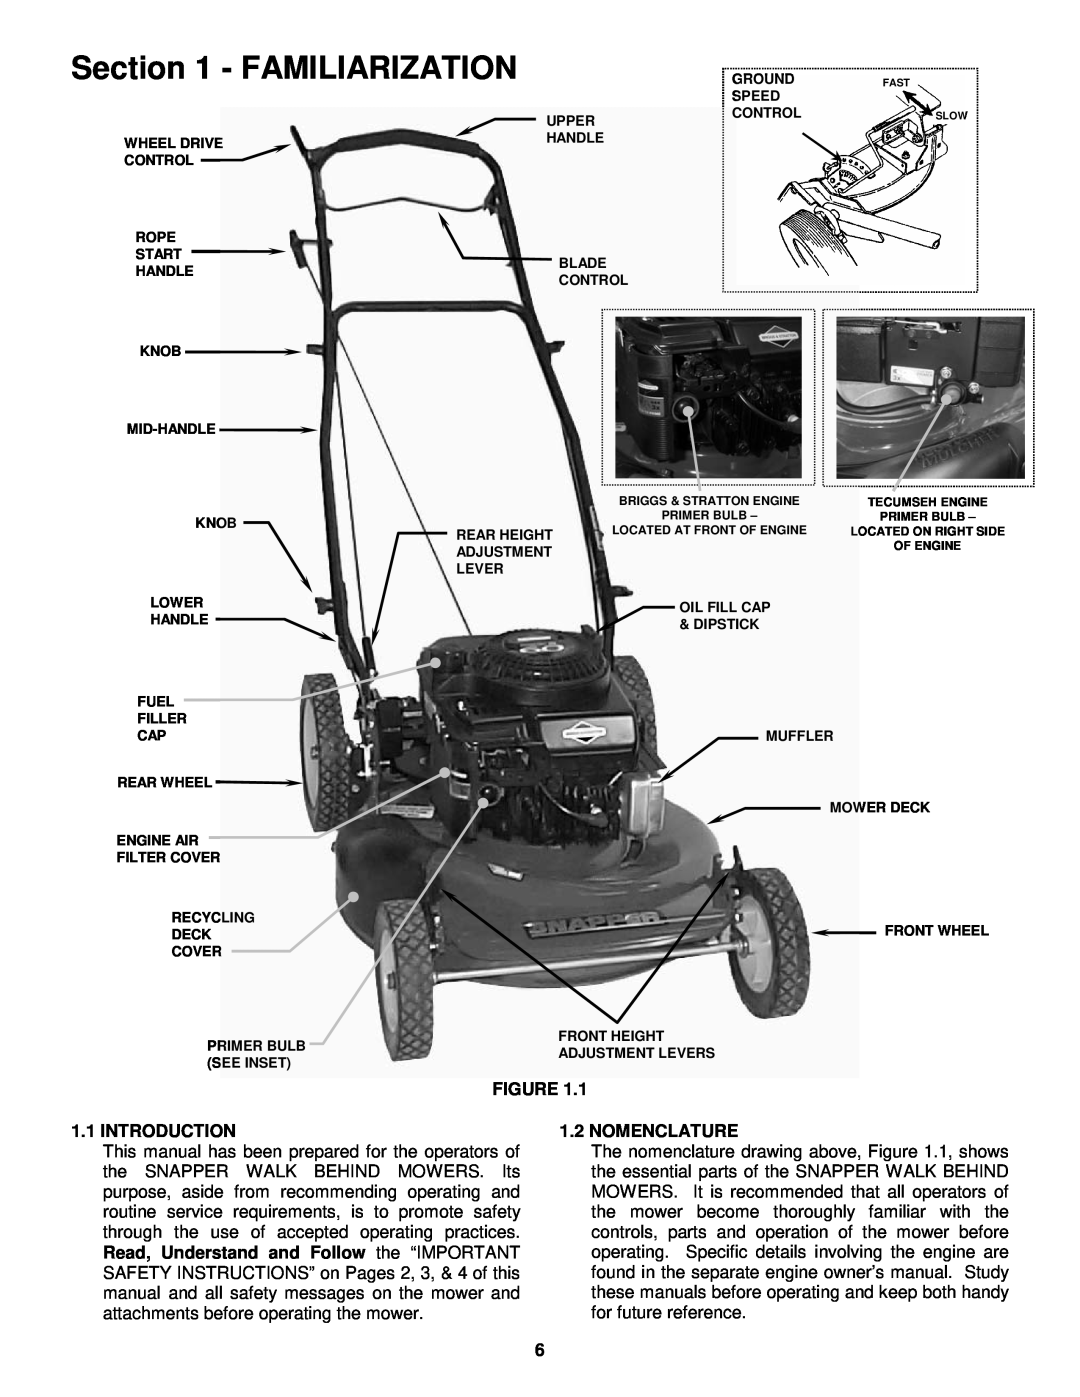 Snapper MR216017B important safety instructions Familiarization, Introduction, Nomenclature 